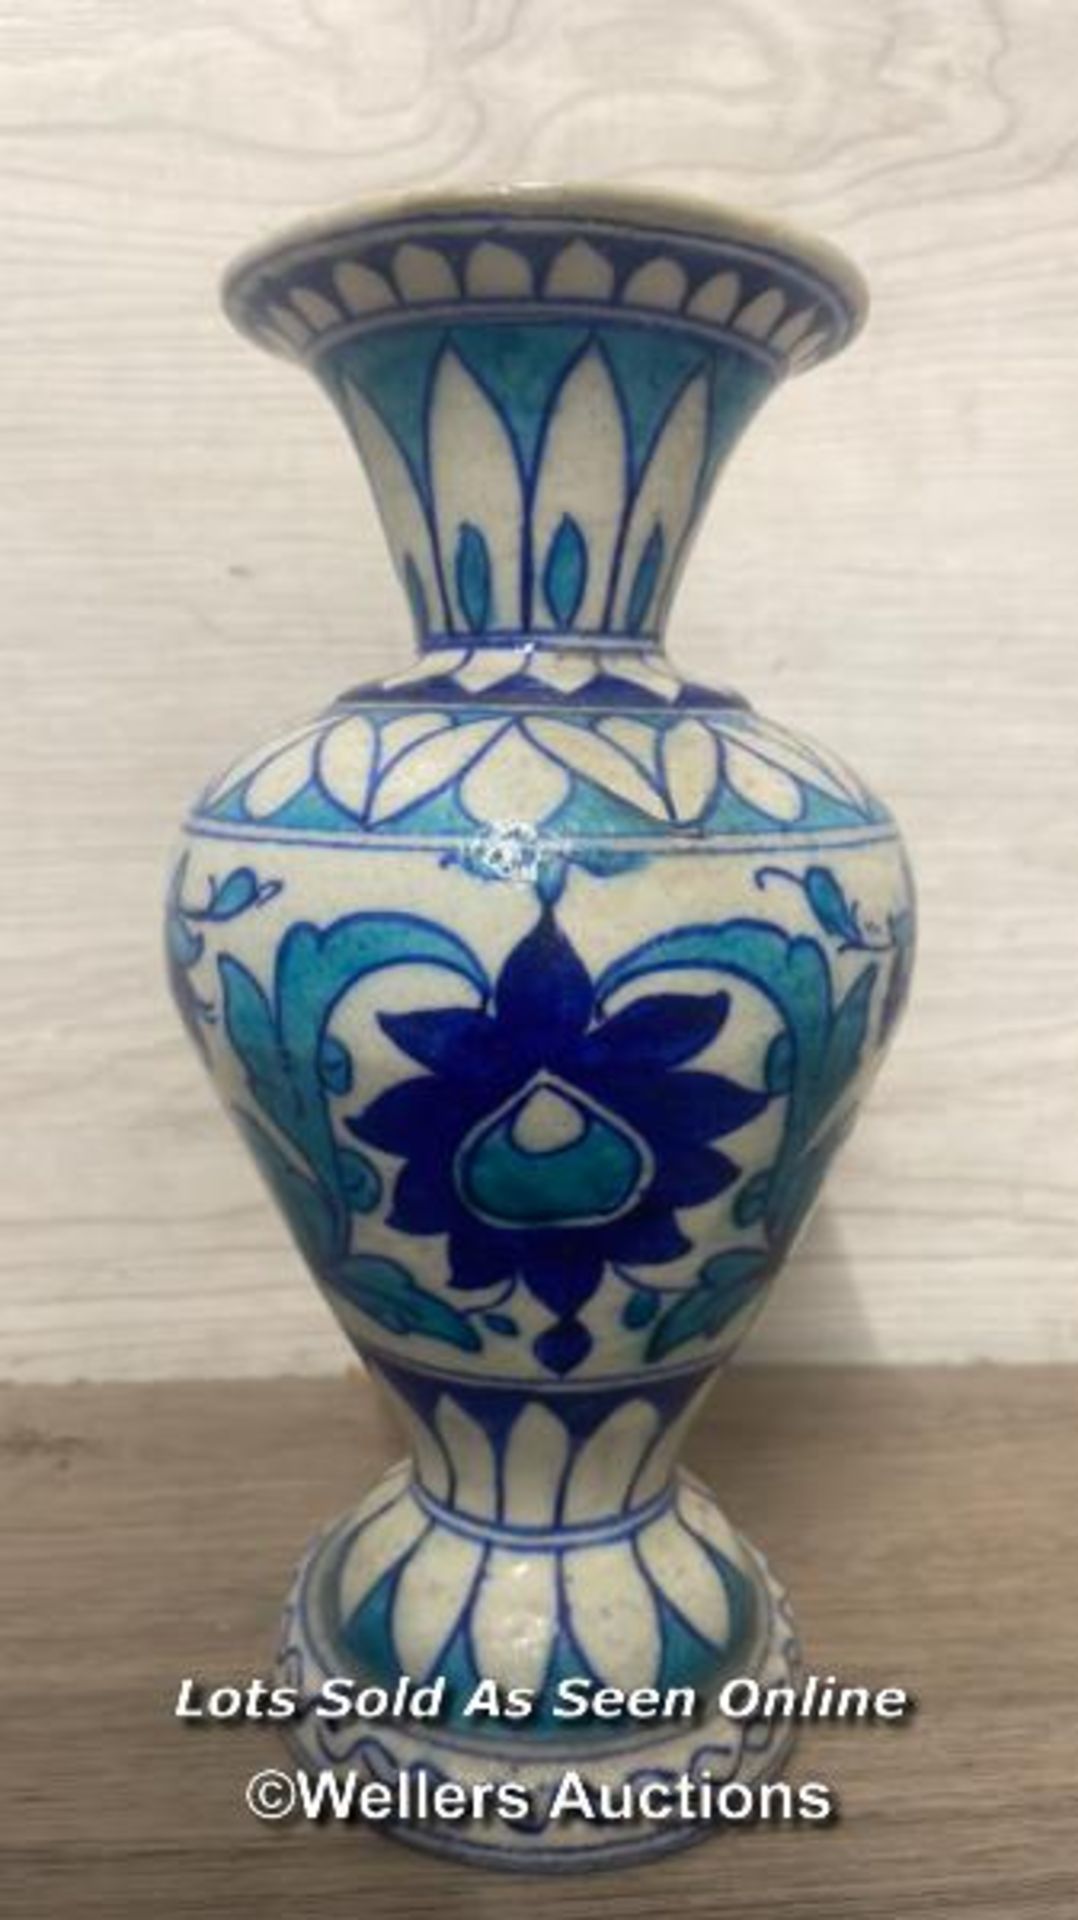 TWO SIMILAR MULTAN POTTERY VASES FROM PAKISTAN, HAND PAINTED BLUE & TURQUOISE FOLIAGE AND FLOWER - Bild 9 aus 15